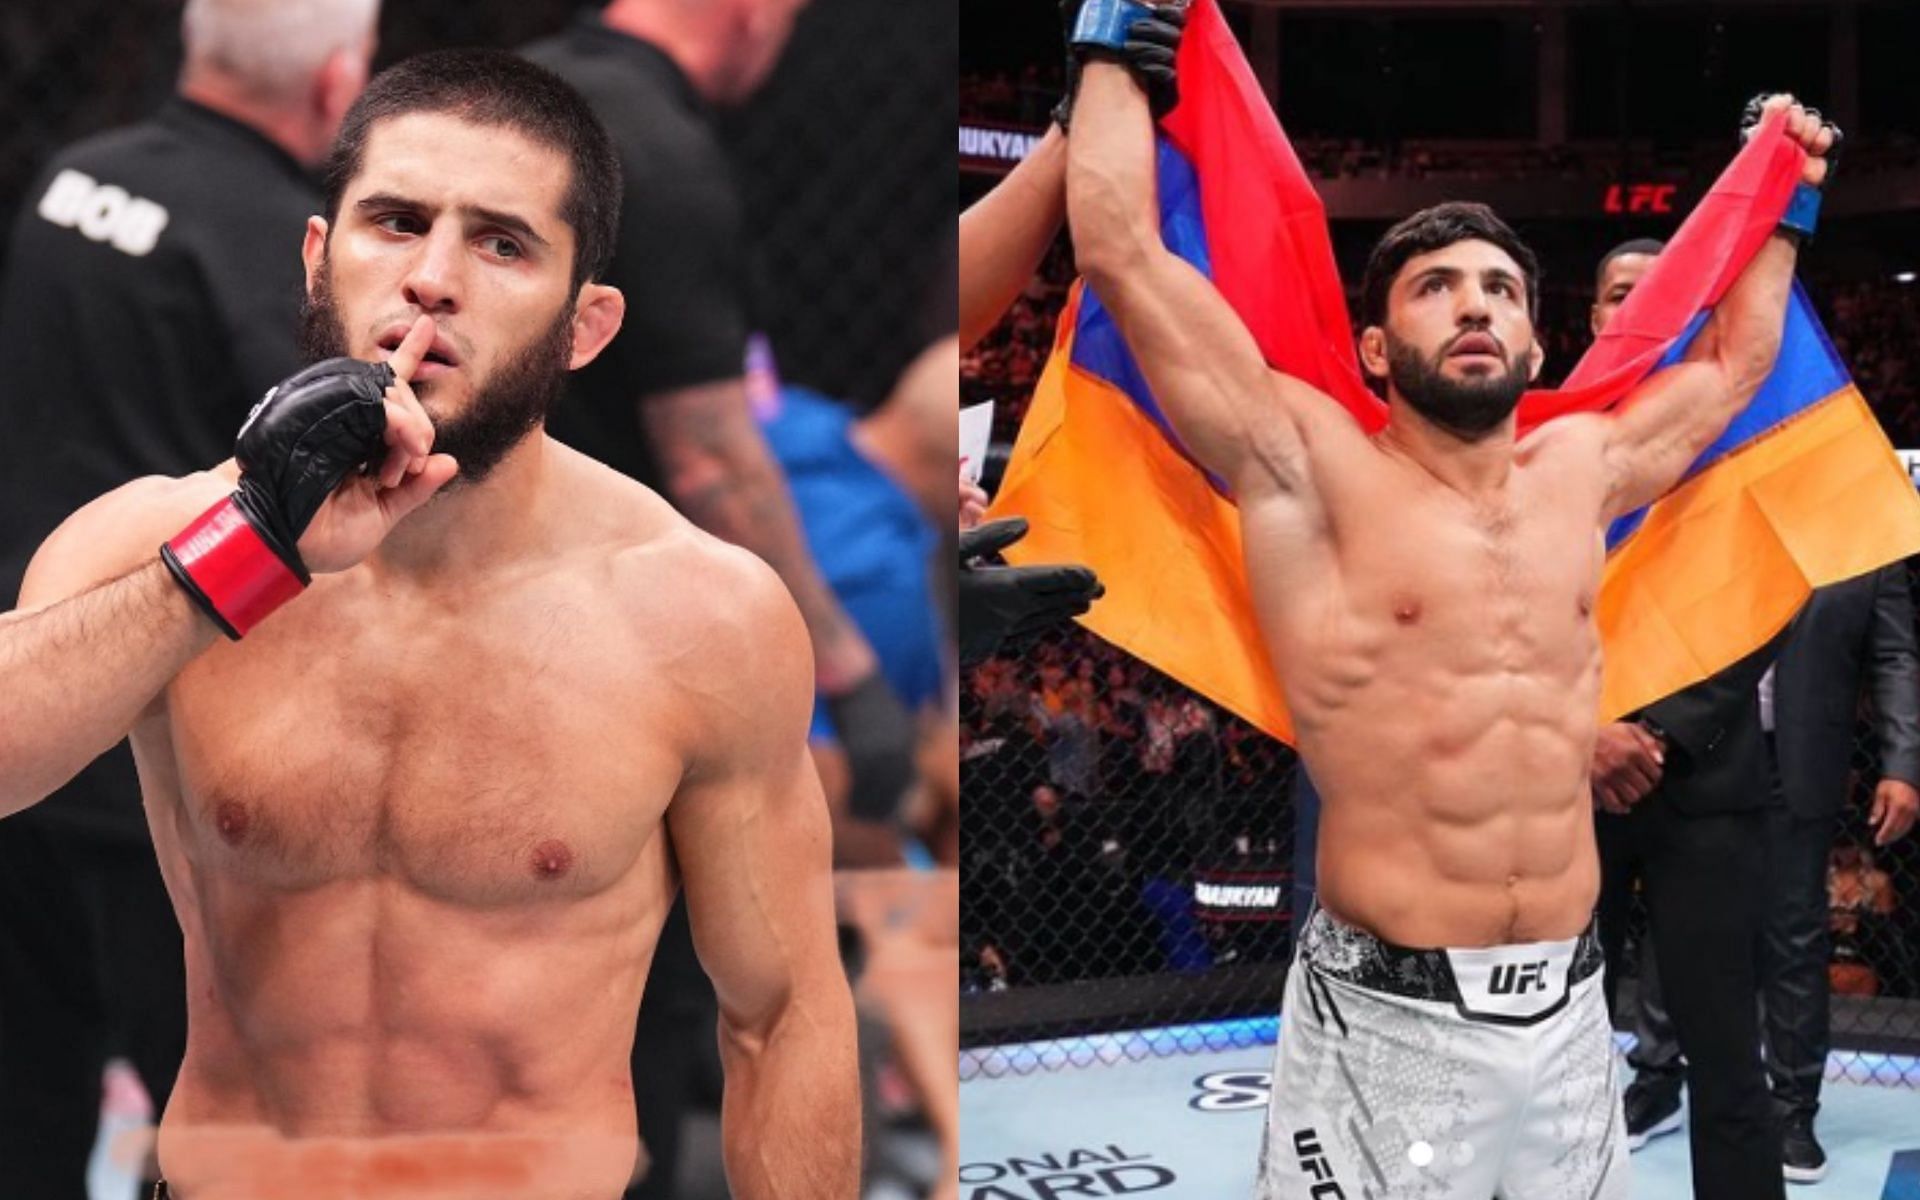 The rivalry between Islam Makhachev and Arman Tsarukyan continues. [images via @arm_011 and @islam_makhachev on Instagram]